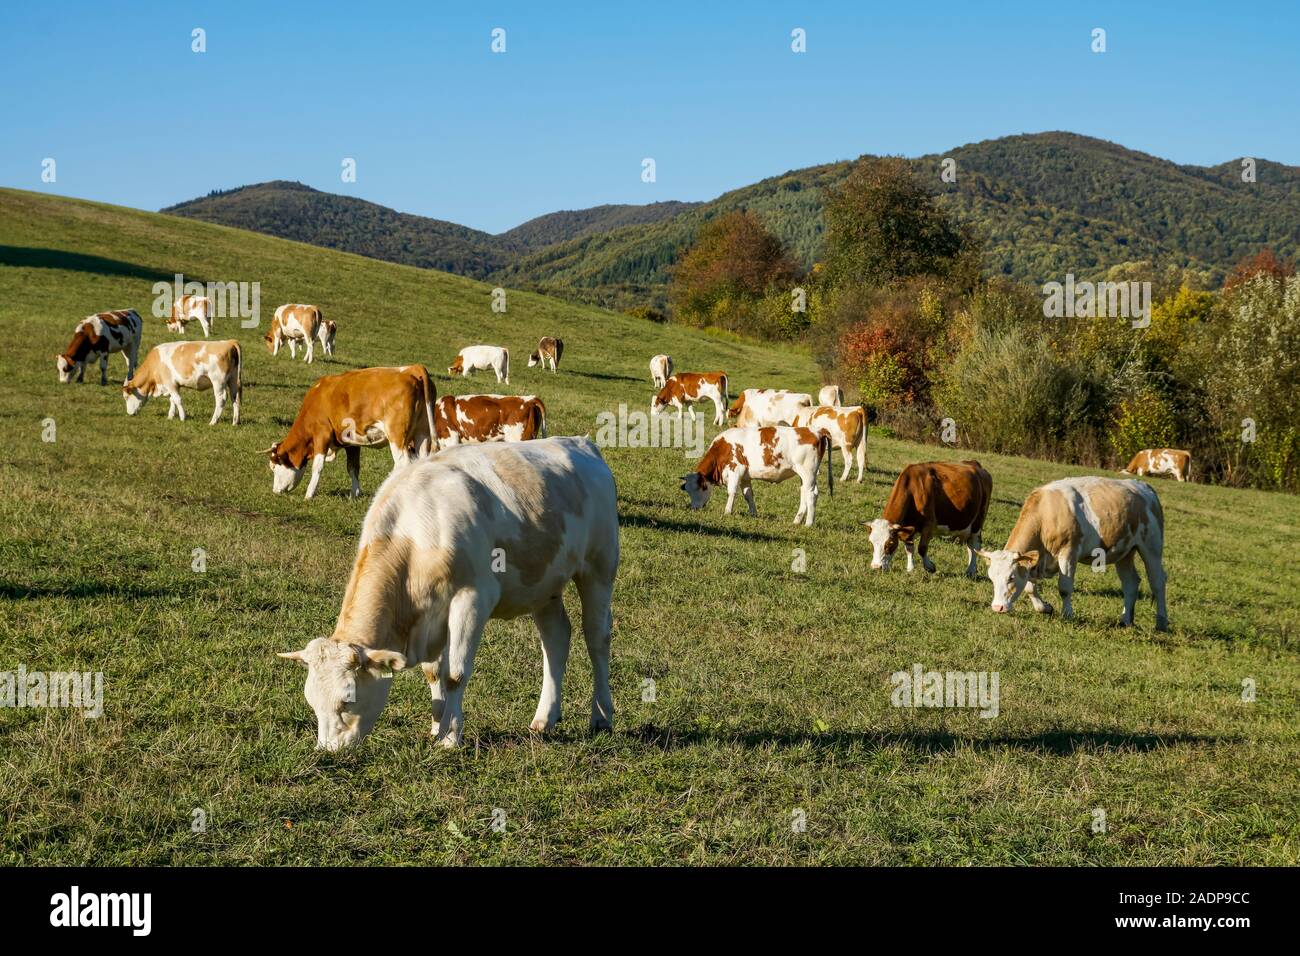 Cows in a pasture in the mountains. Eastern Carpathians, Slovakia, Europe Stock Photo